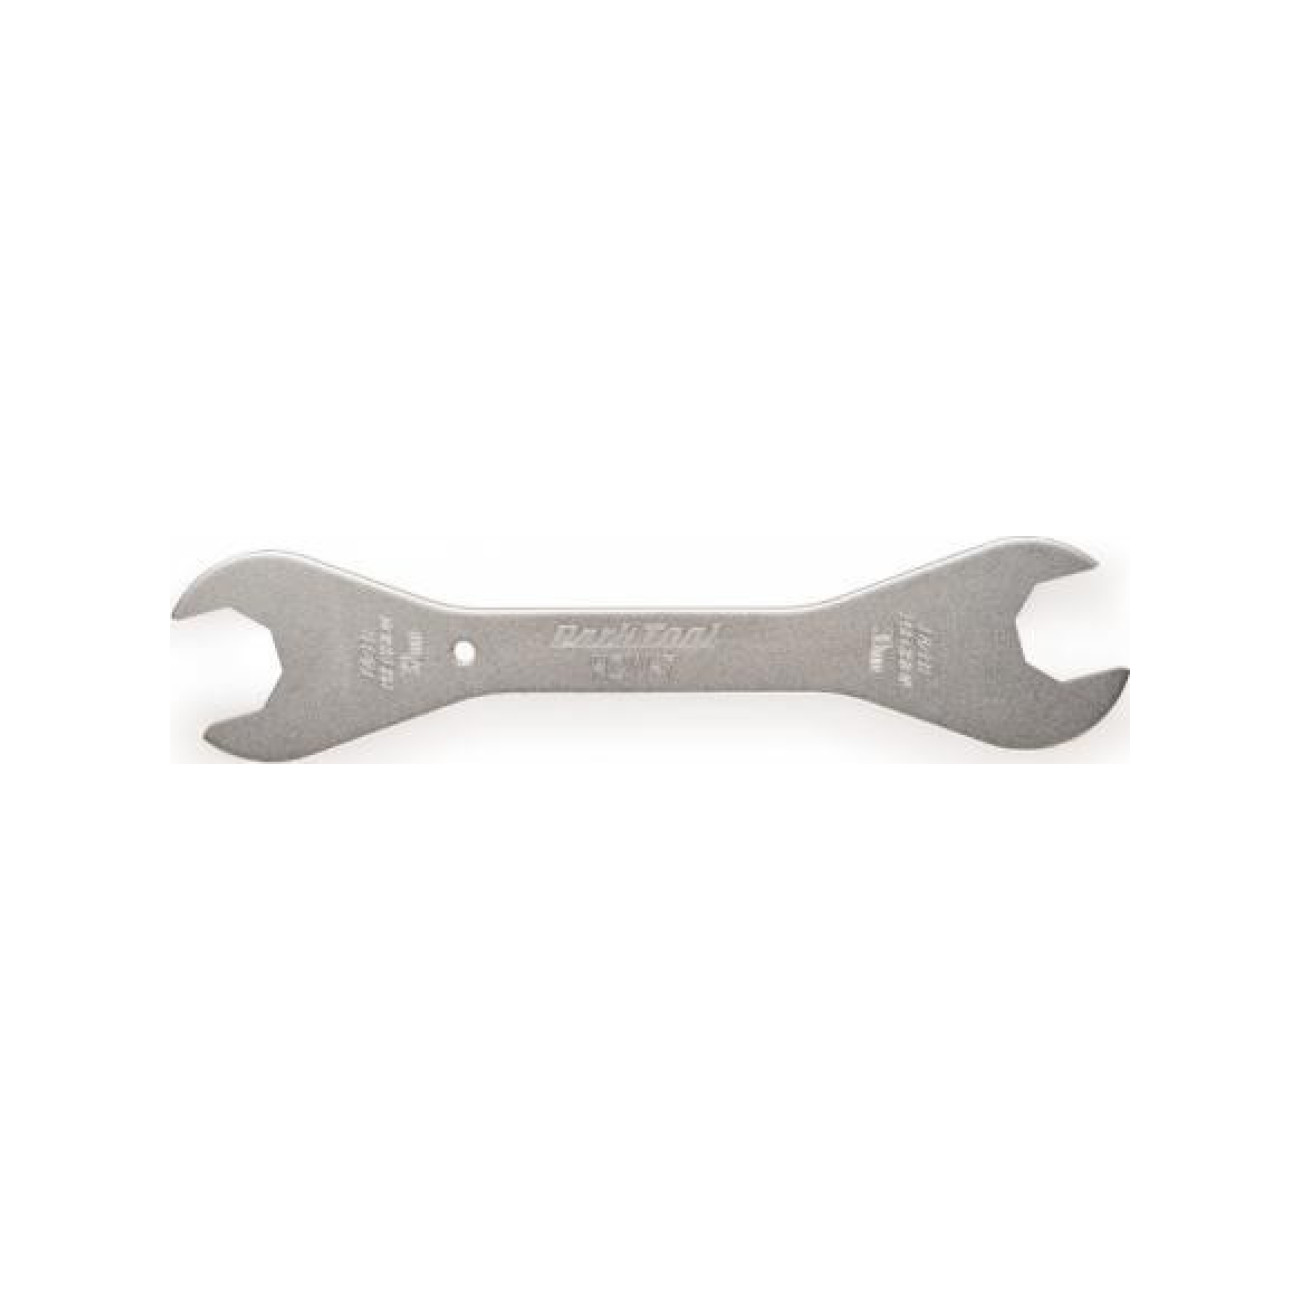 PARK TOOL Kulcs - WRENCH 30 - 32 Mm PT-HCW-7 - Ezüst